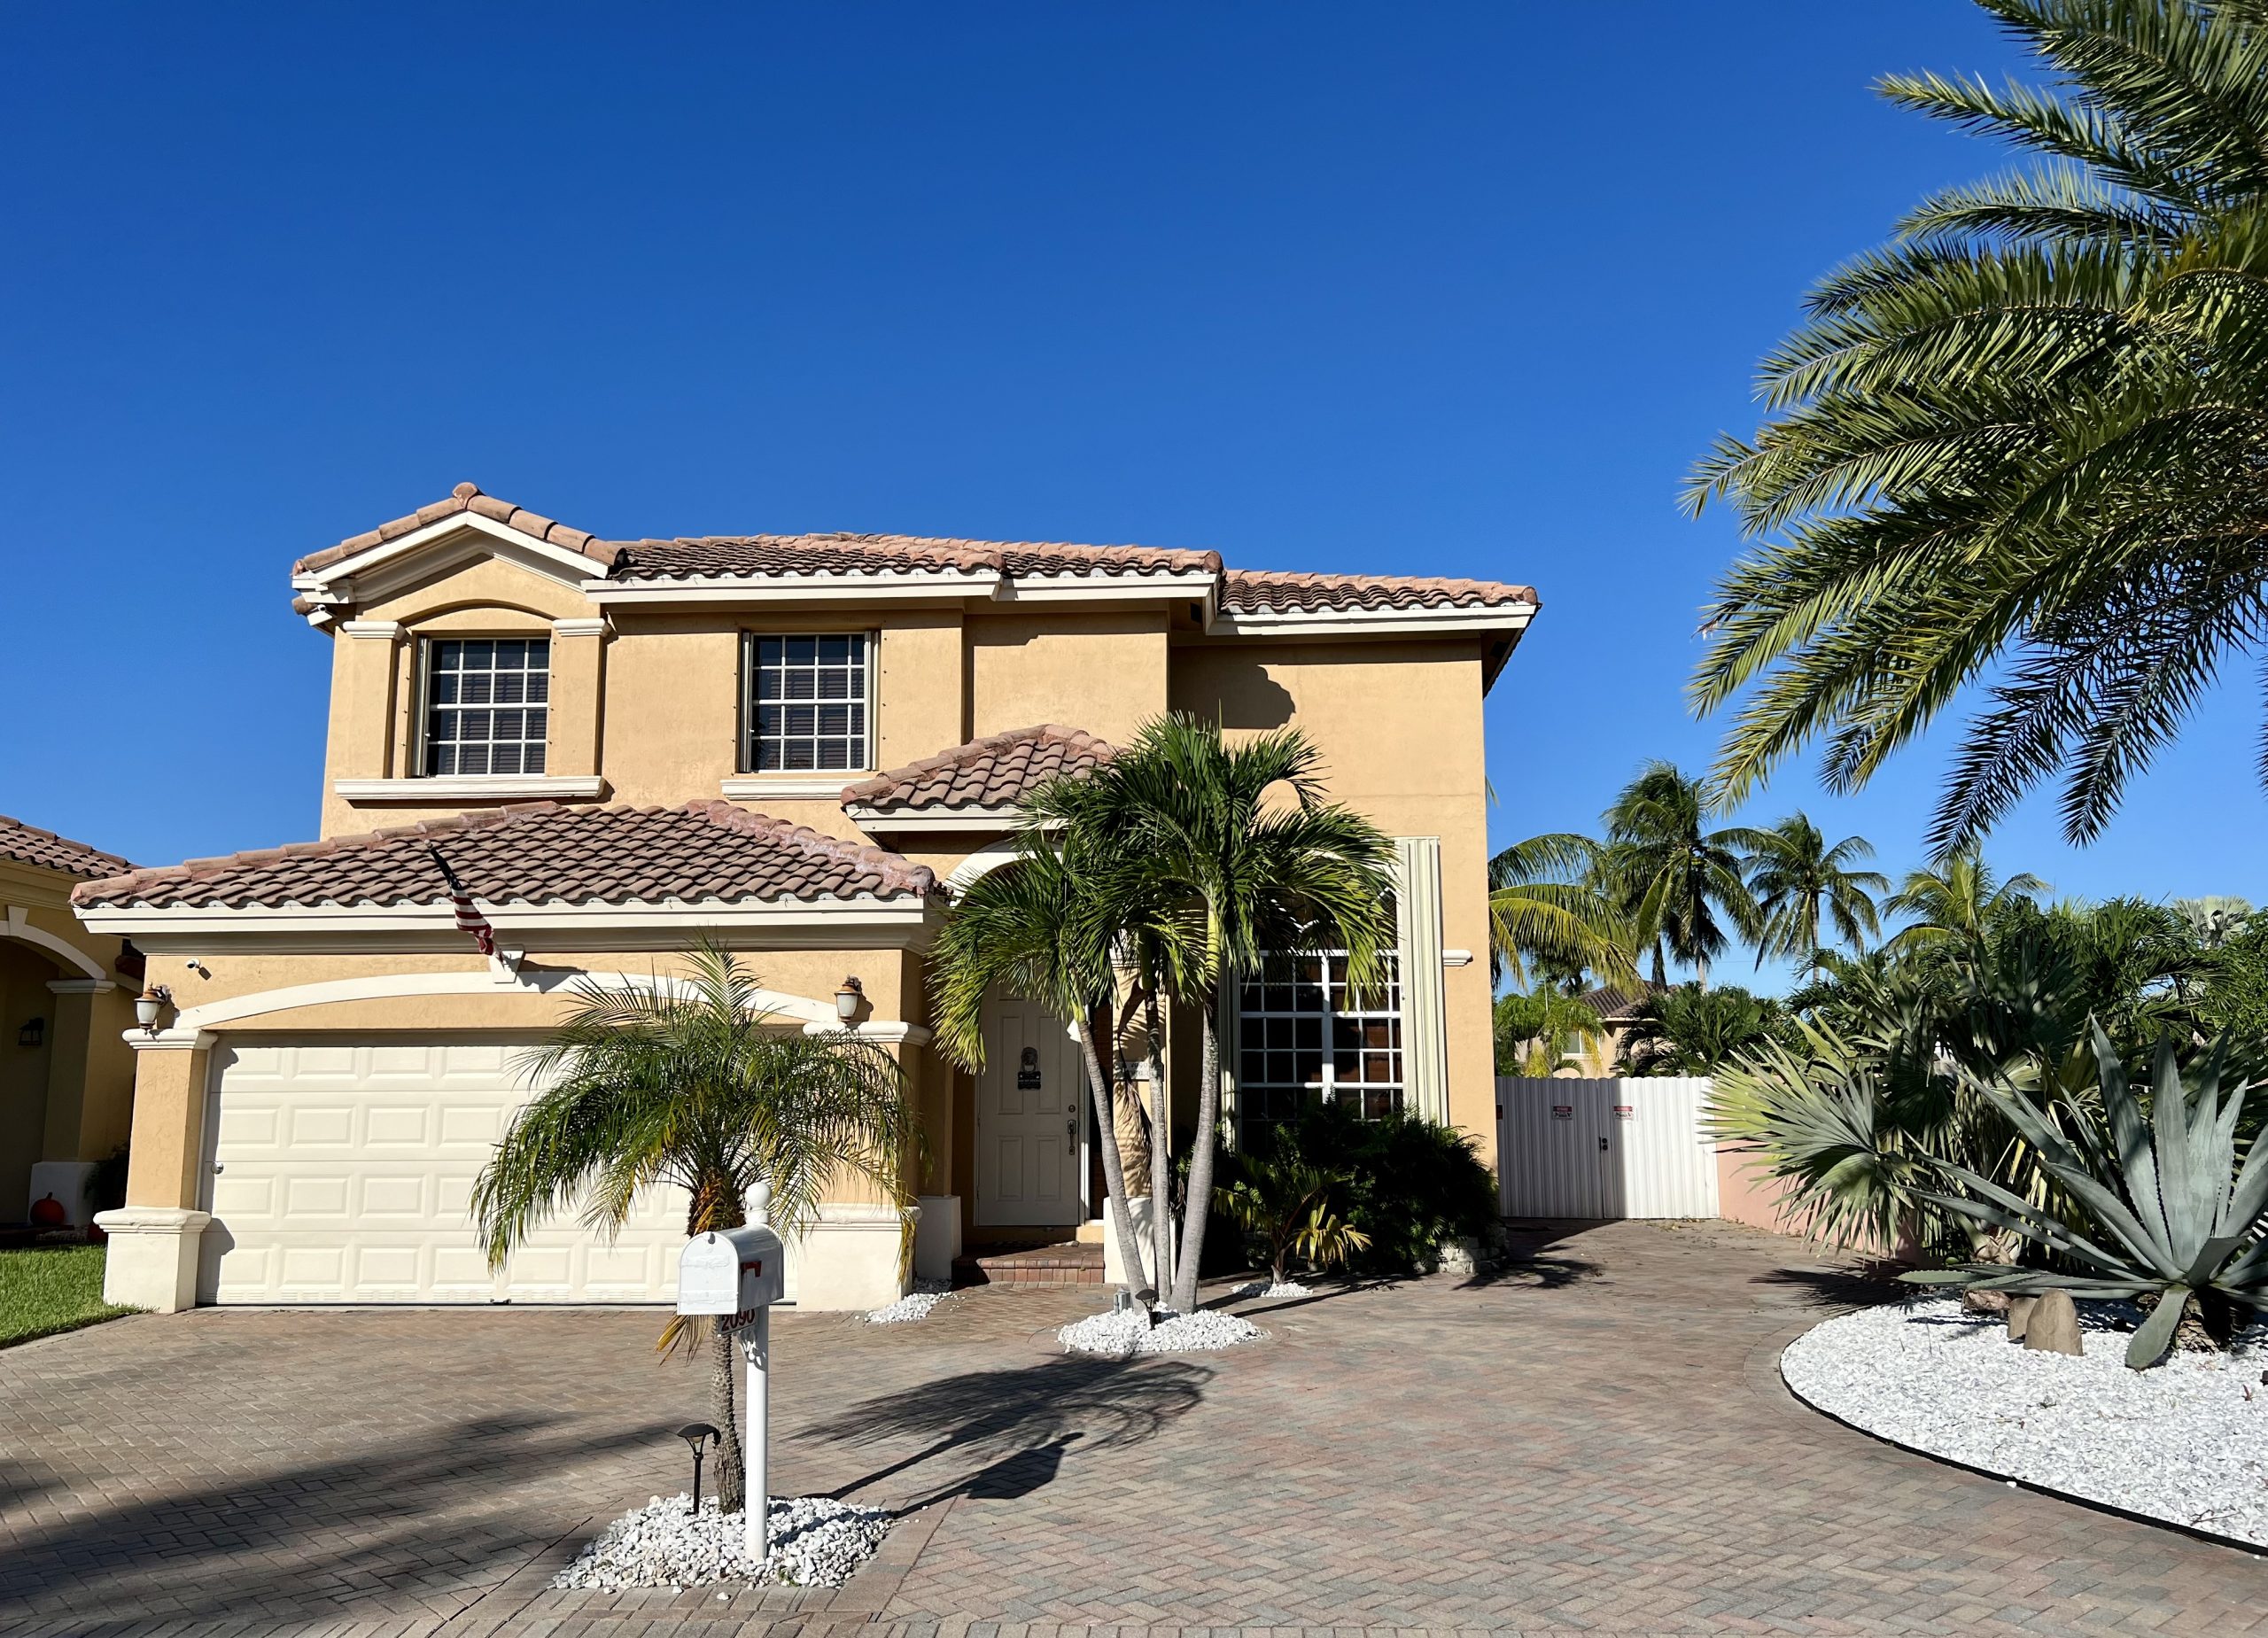 Immaculate 2 Story Pool Home in Victoria Villas Pembroke Pines Florida